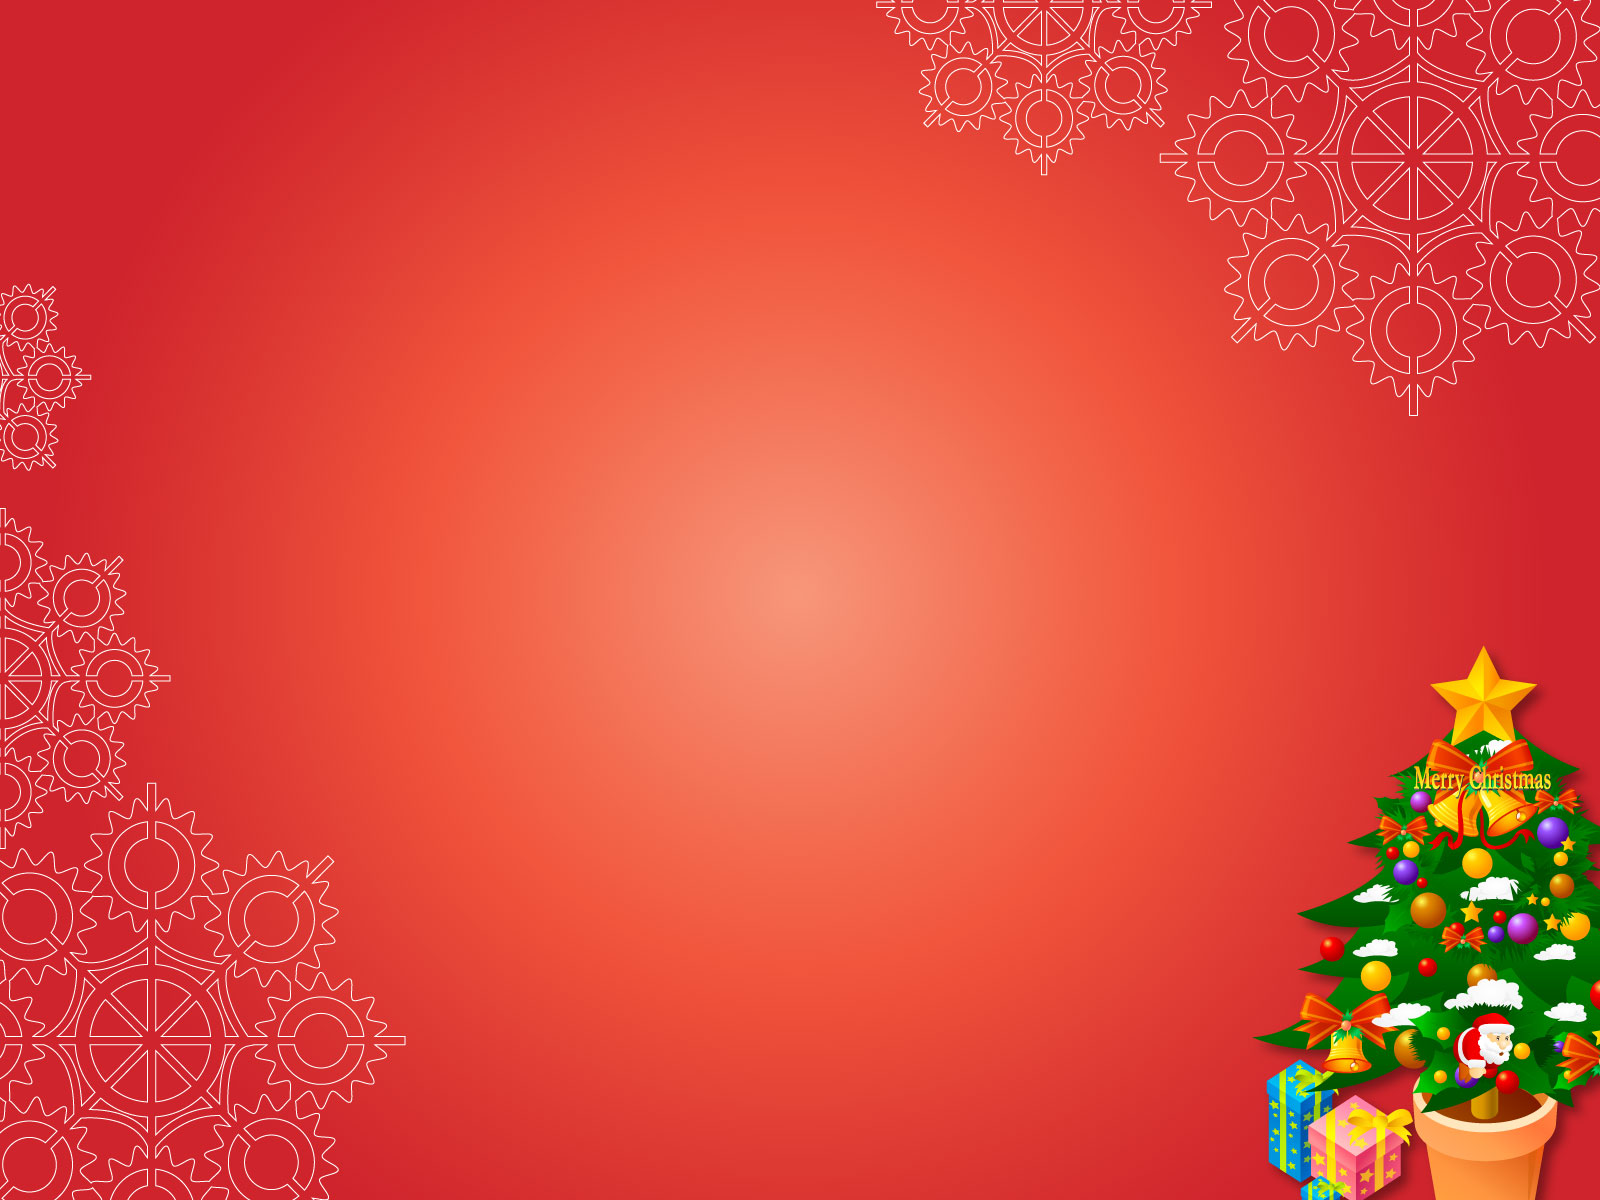  textures, New Year, Christmas texture, Christmas and New Year texture background